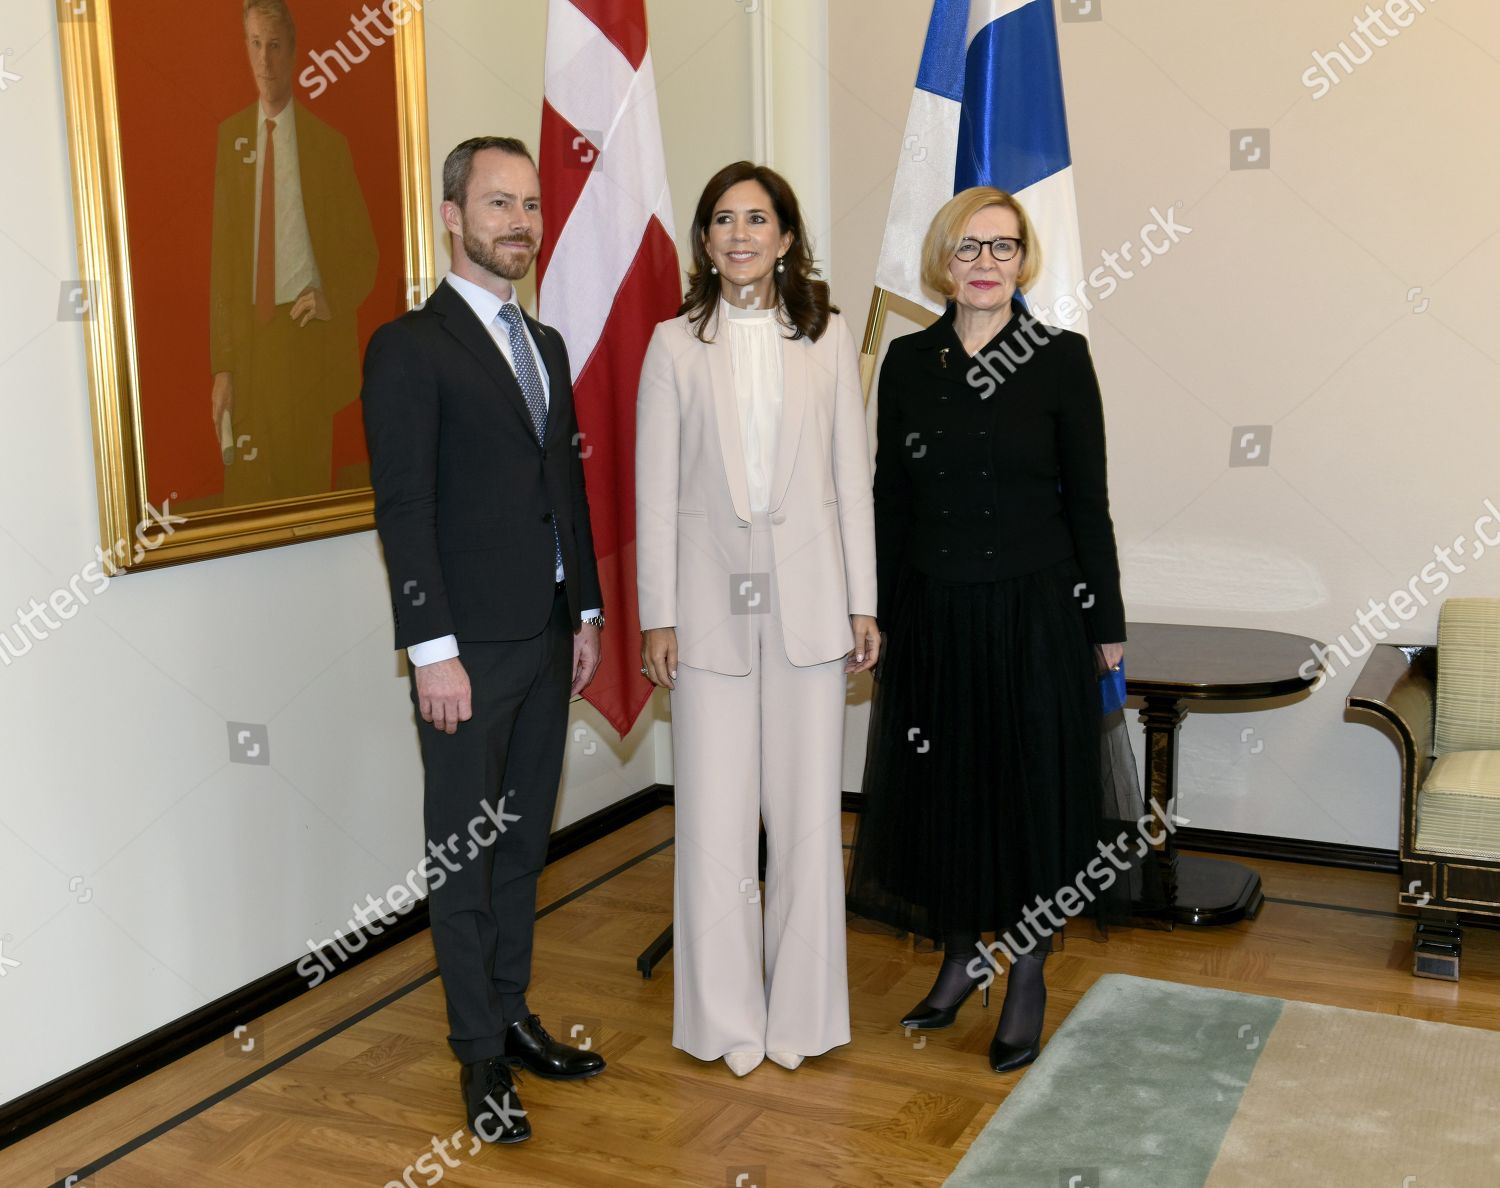 crown-princess-mary-visit-to-finland-shutterstock-editorial-9881095e.jpg